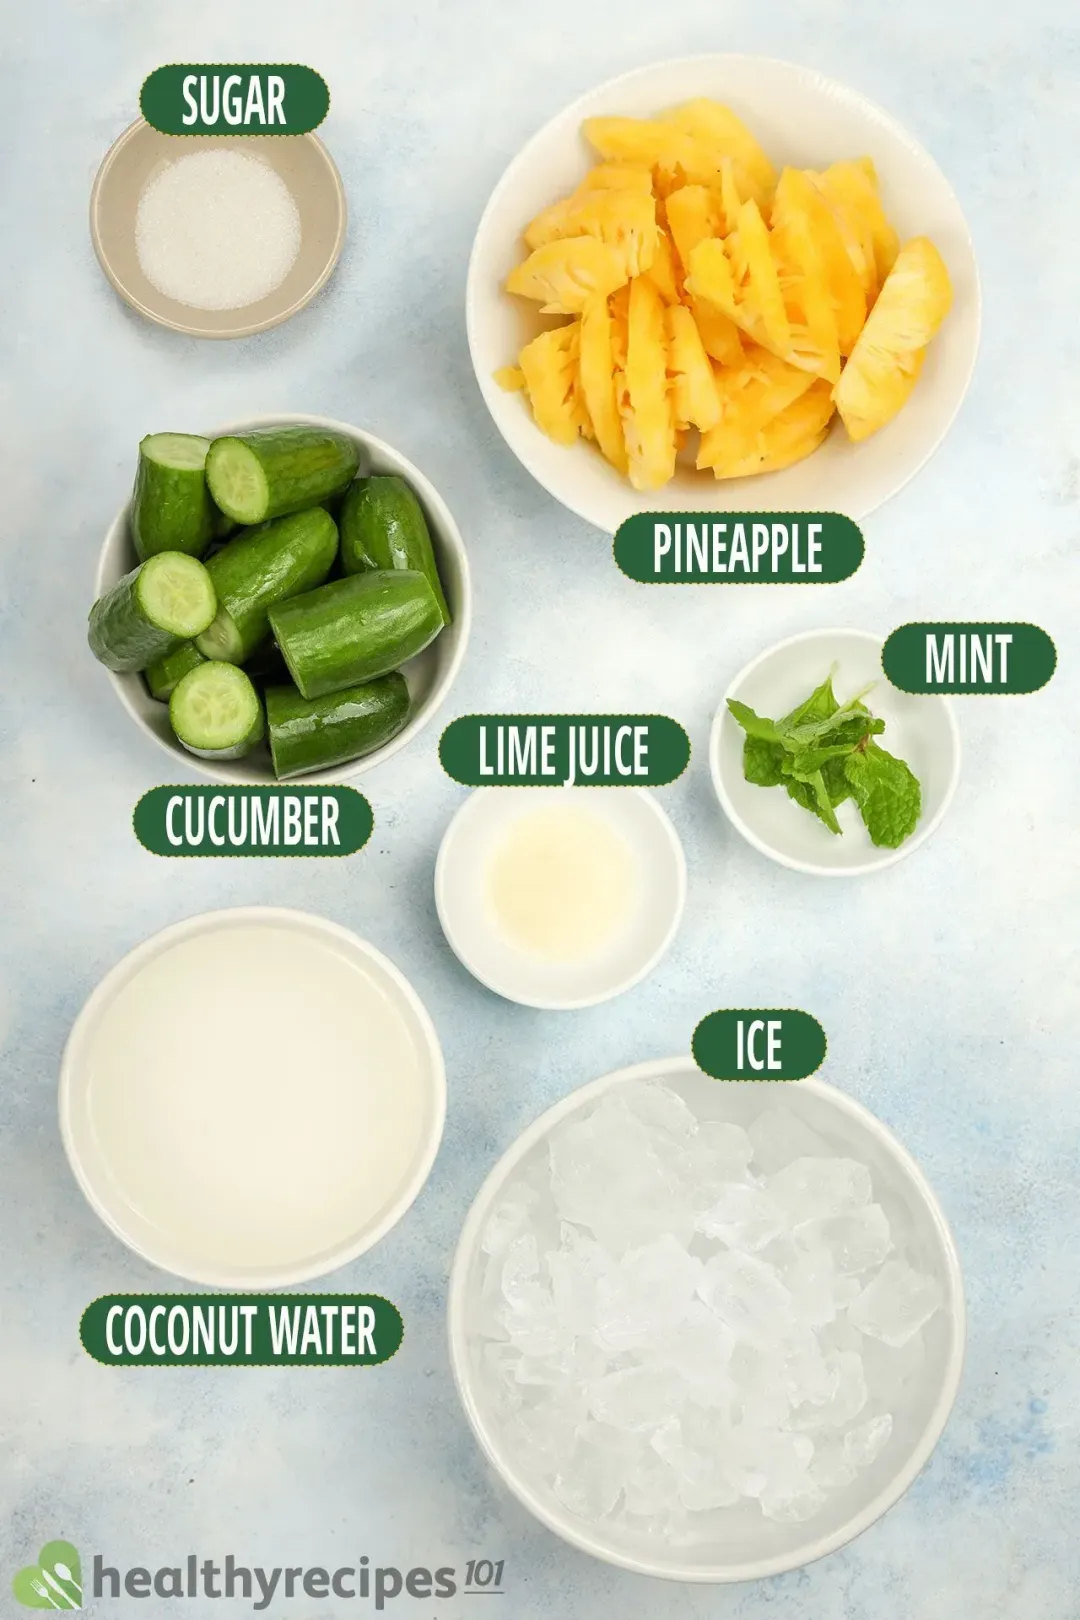 Ingredients for Cucumber Pineapple Smoothie